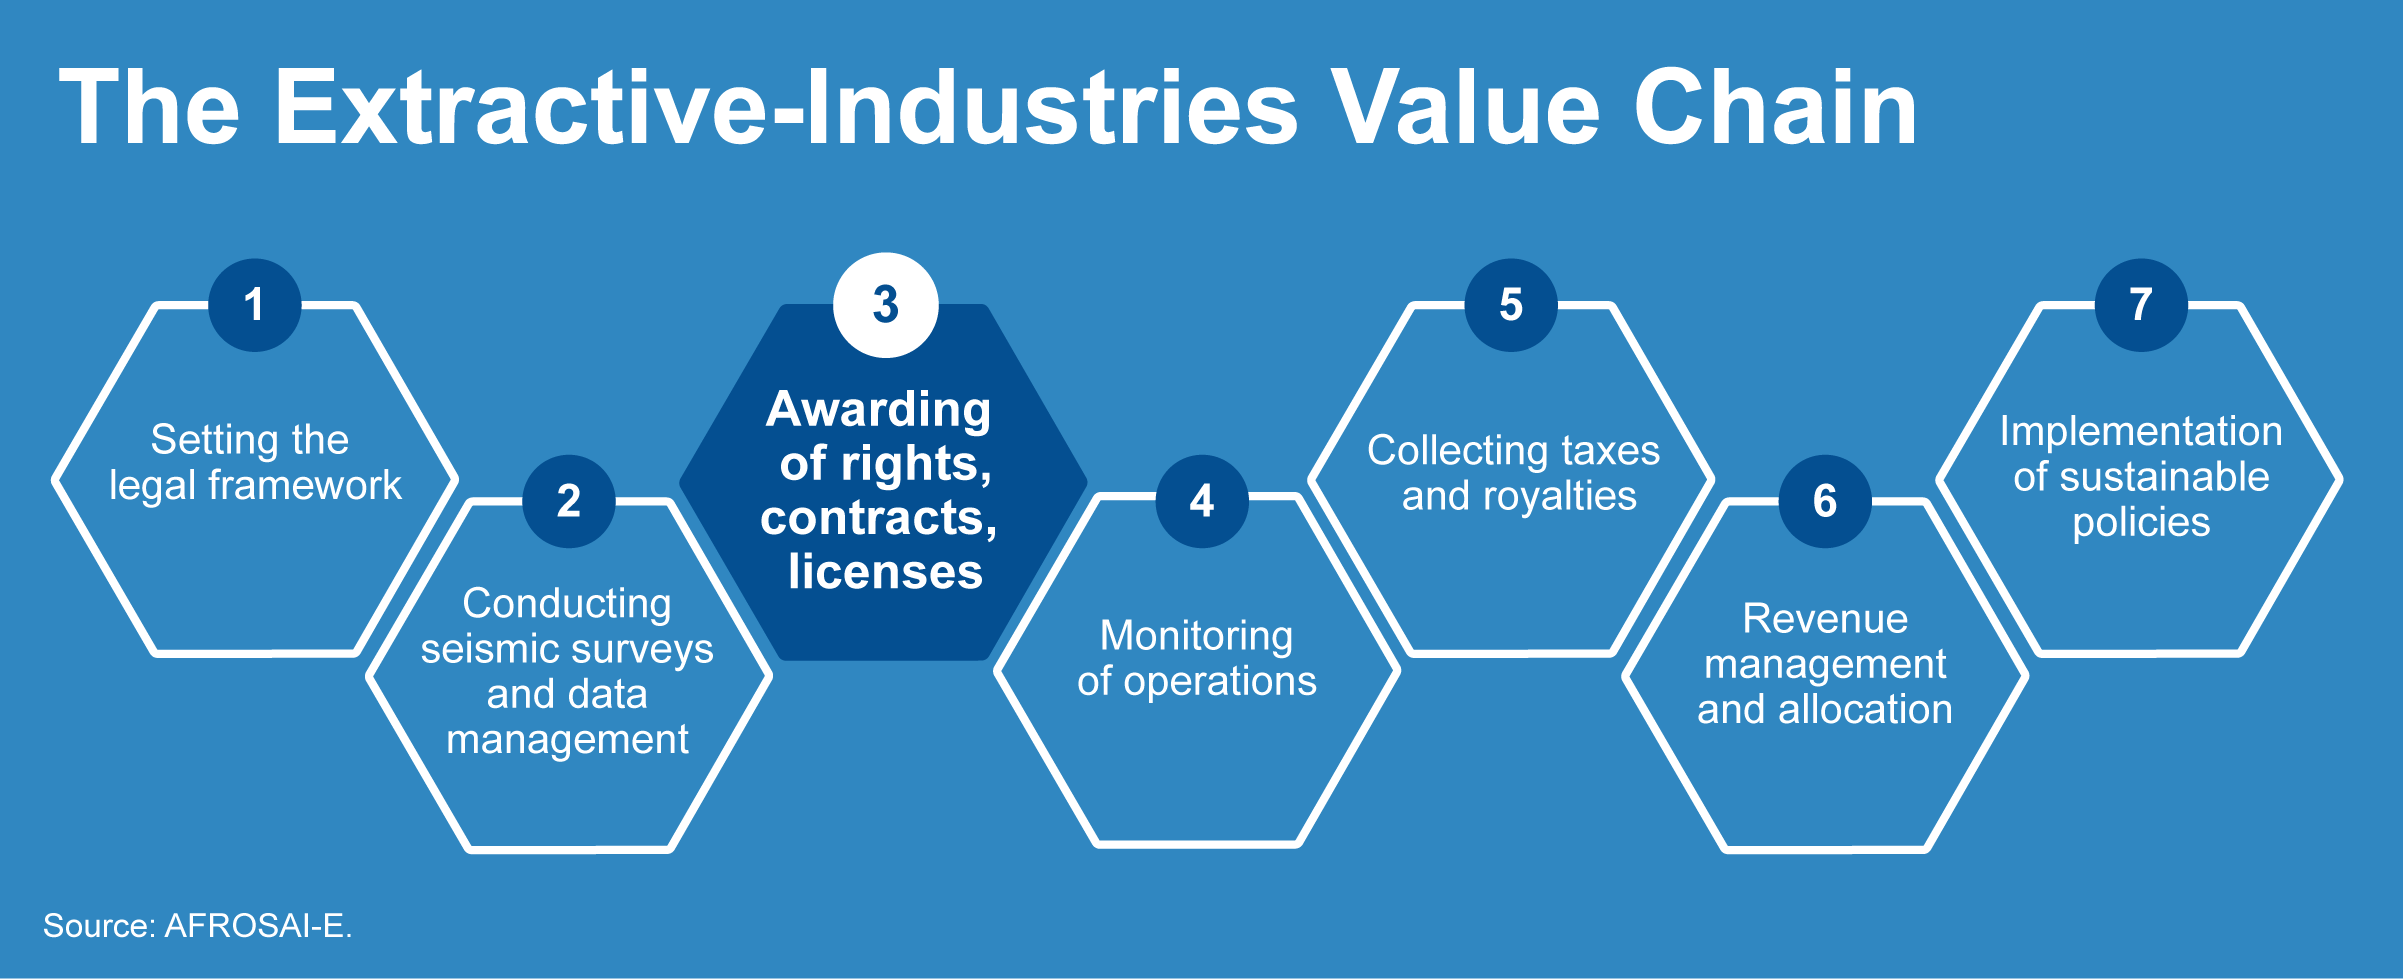 Extractive Industries Value Chain